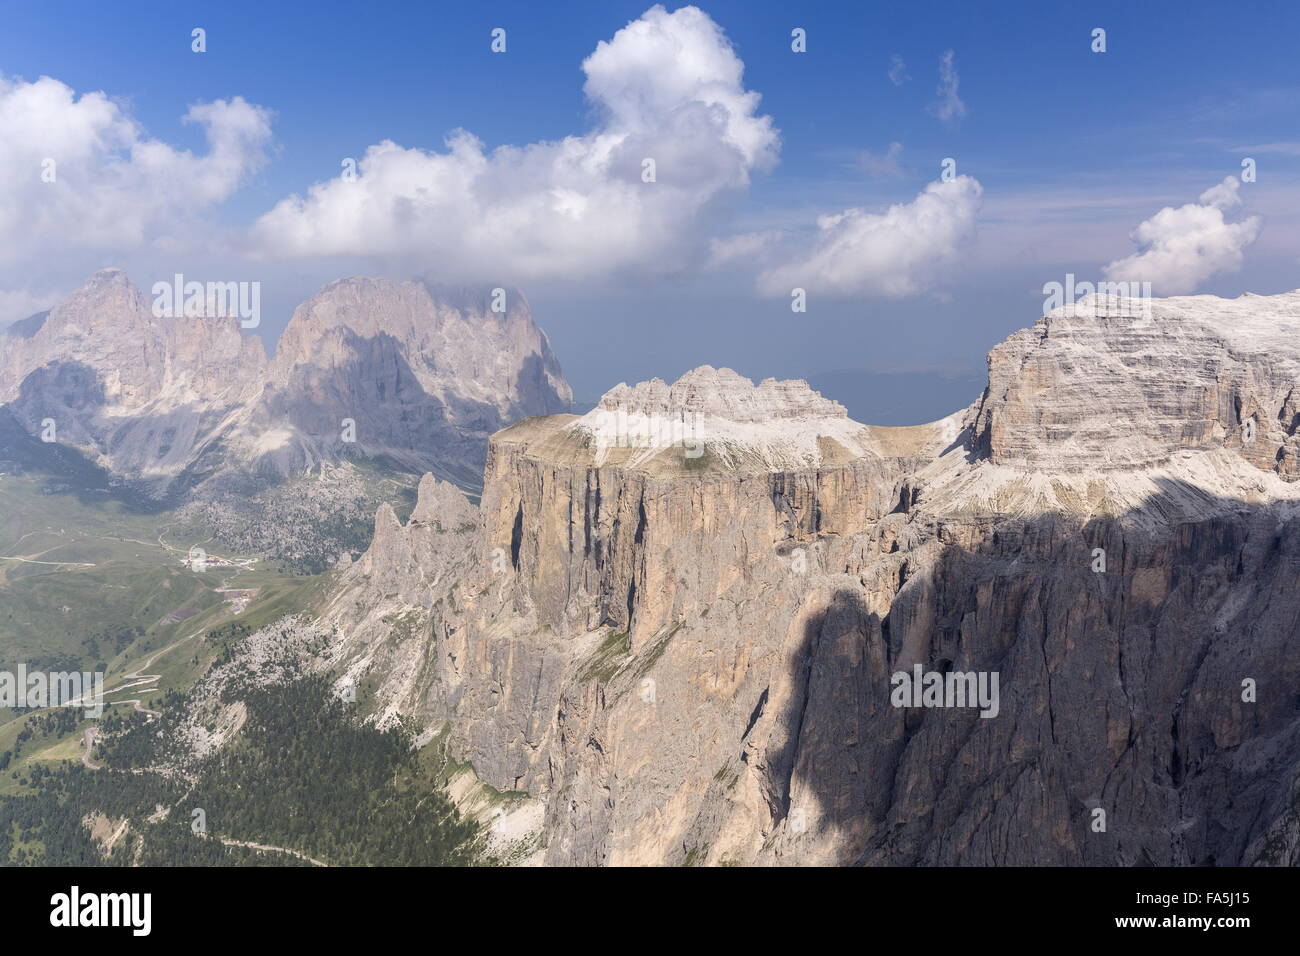 Looking west along the scarp of the Sella Group, Sella Gruppe, in the Dolomites, Italy. Stock Photo